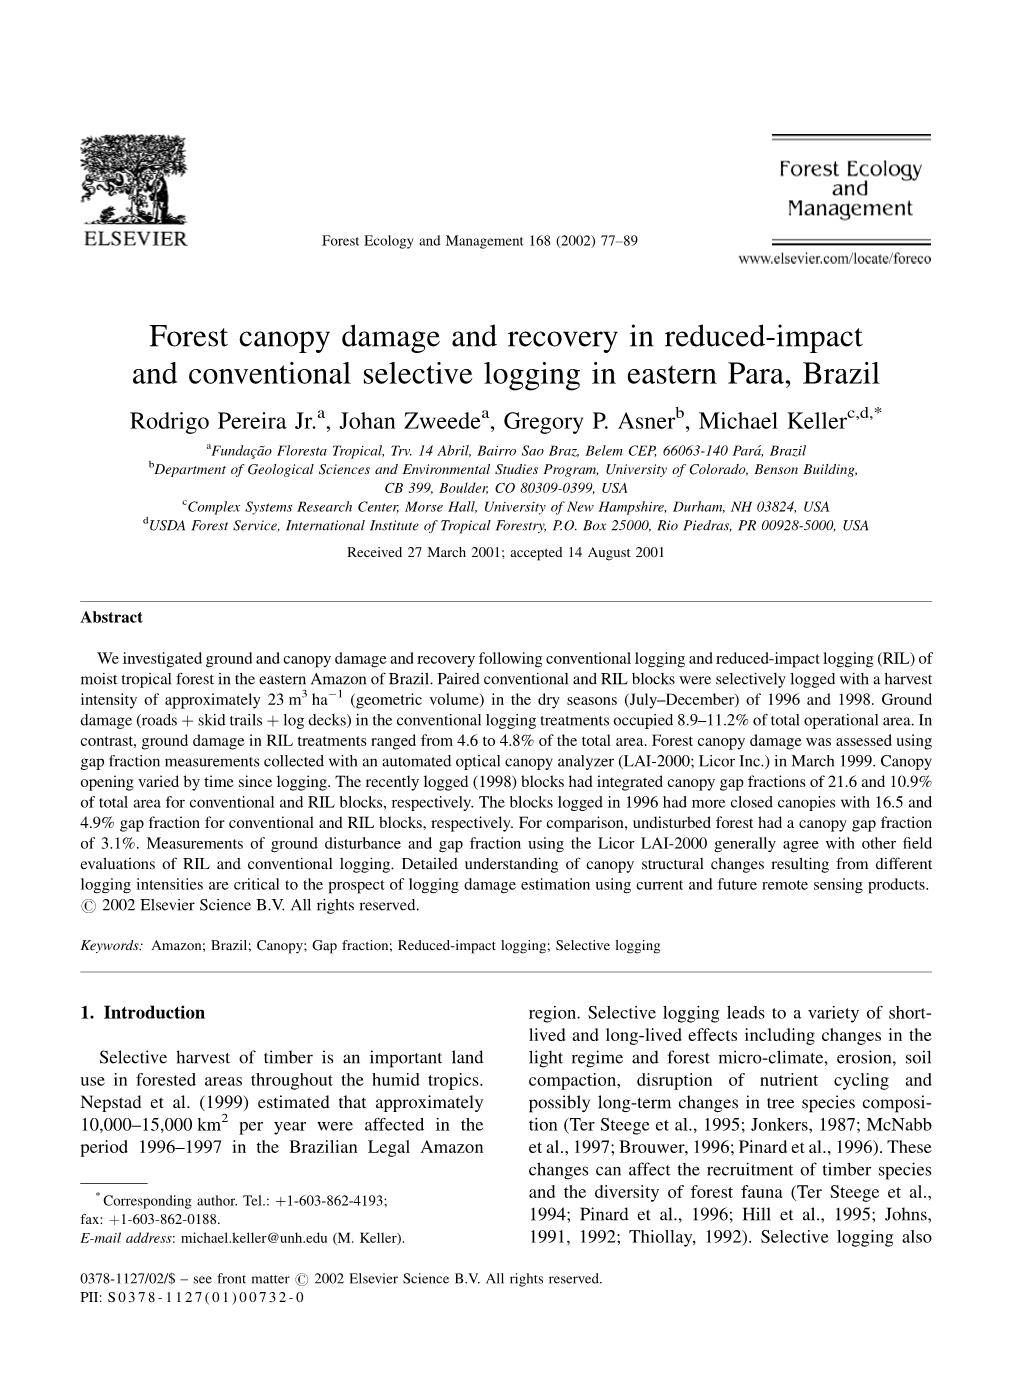 Forest Canopy Damage and Recovery in Reduced-Impact and Conventional Selective Logging in Eastern Para, Brazil Rodrigo Pereira Jr.A, Johan Zweedea, Gregory P